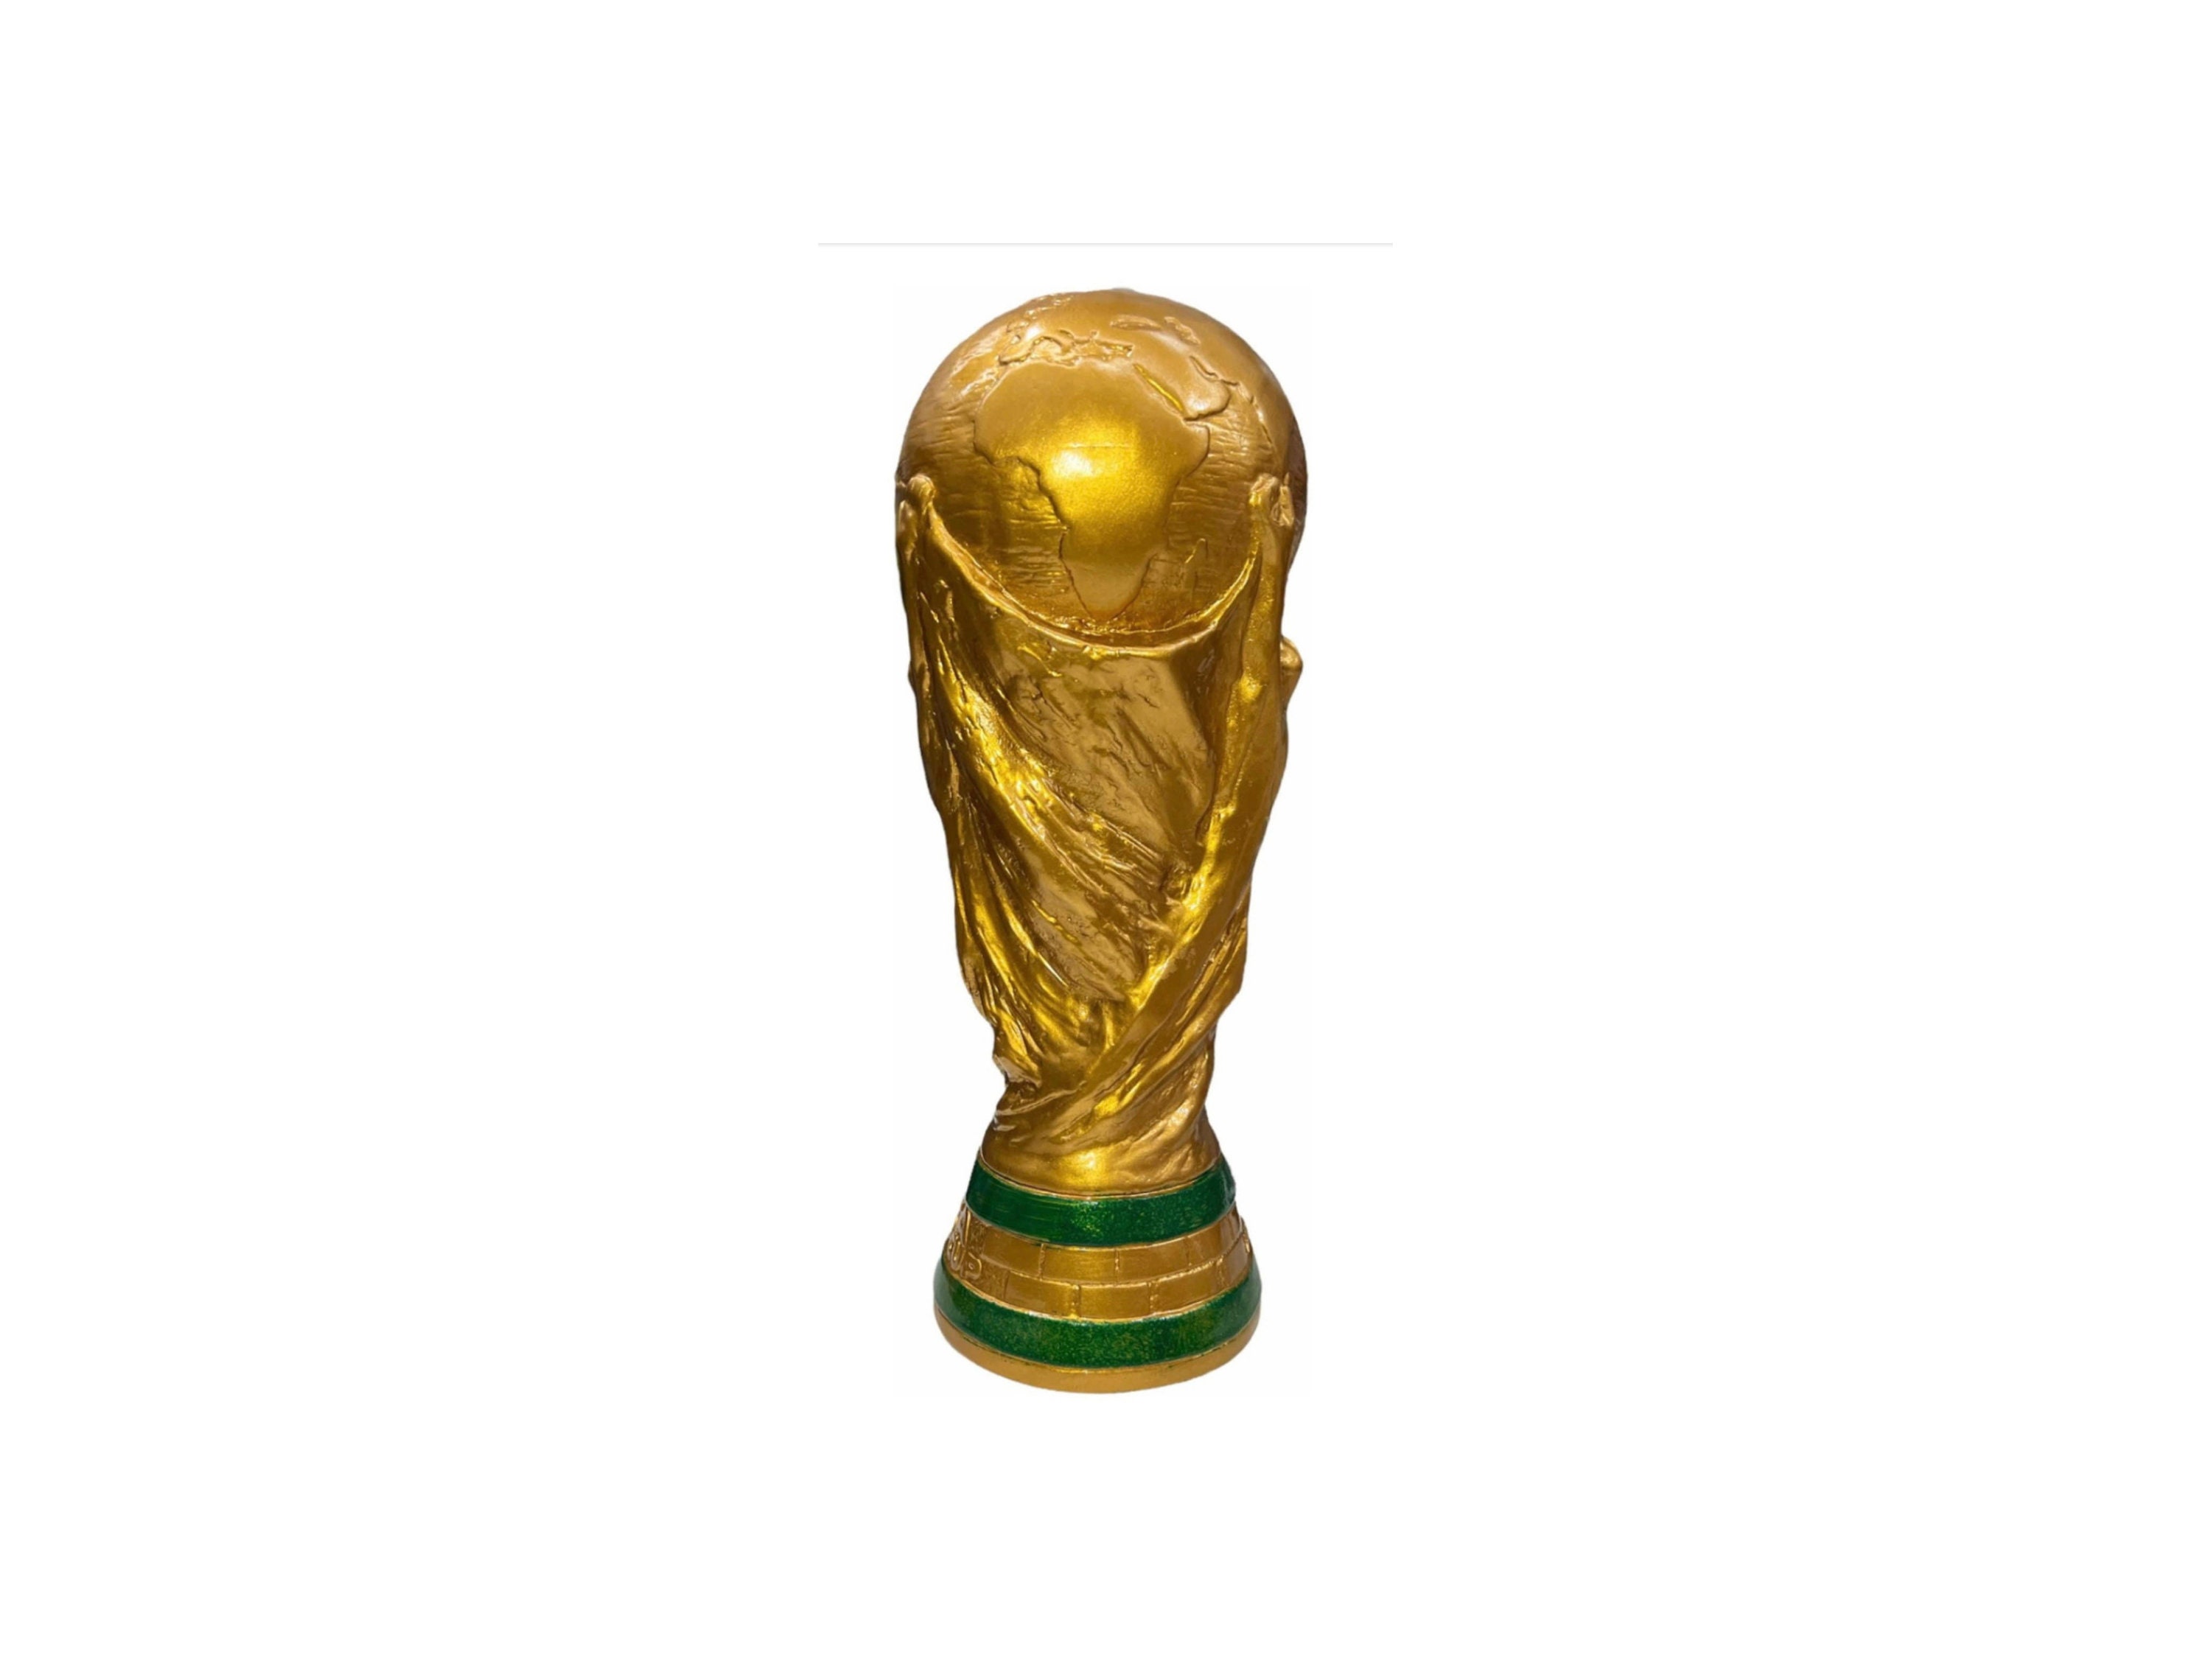 Replica soccer world cup trophy - Fineartsfrance